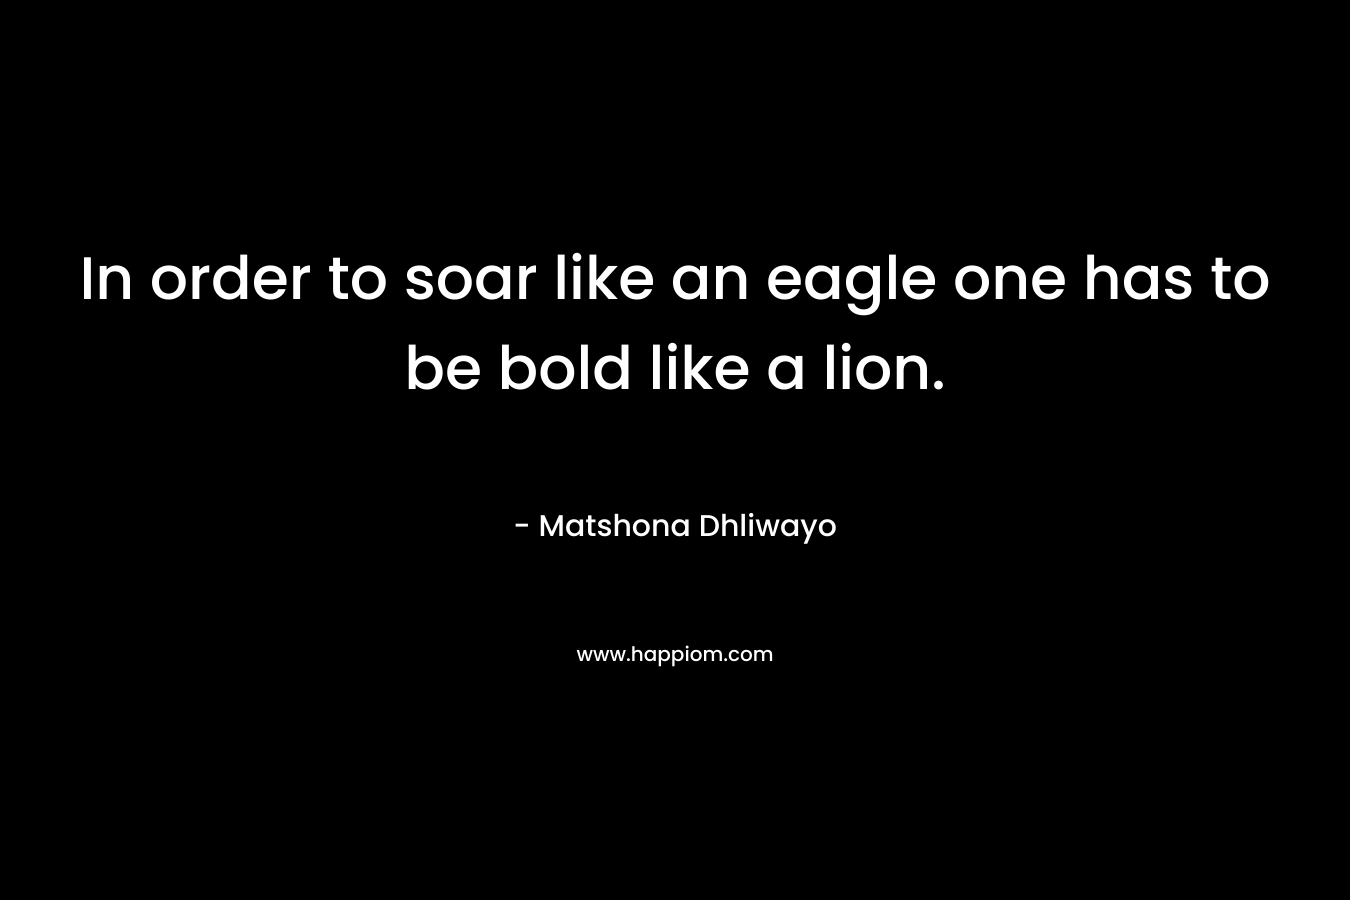 In order to soar like an eagle one has to be bold like a lion. – Matshona Dhliwayo